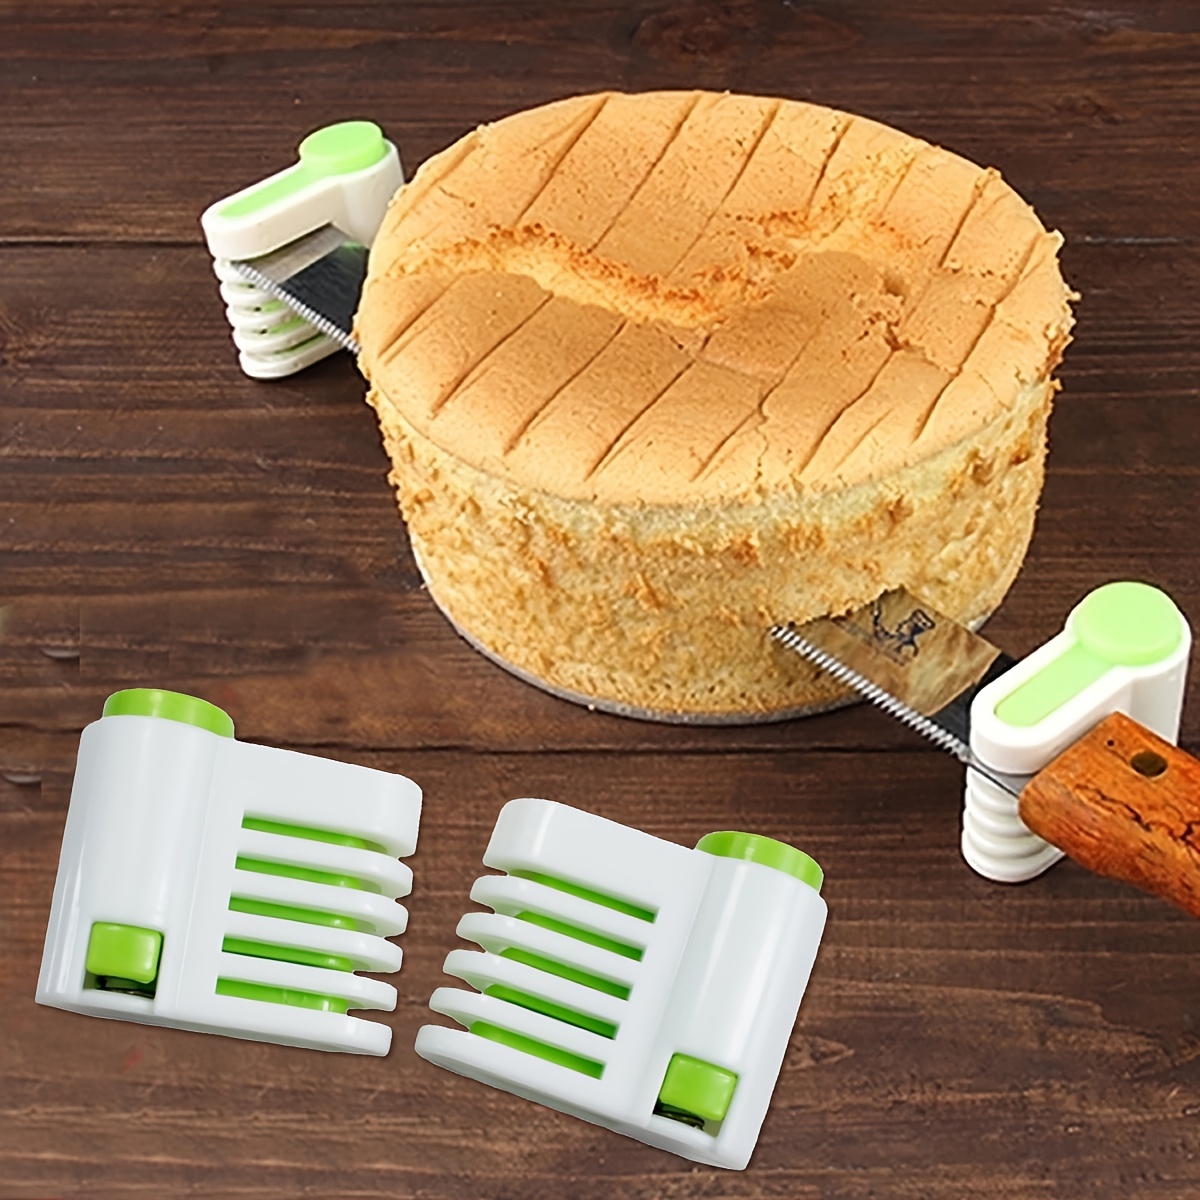 Zeal Cake Cutter Serving Slice, Perfect for Serving Cake and Pizza | eBay